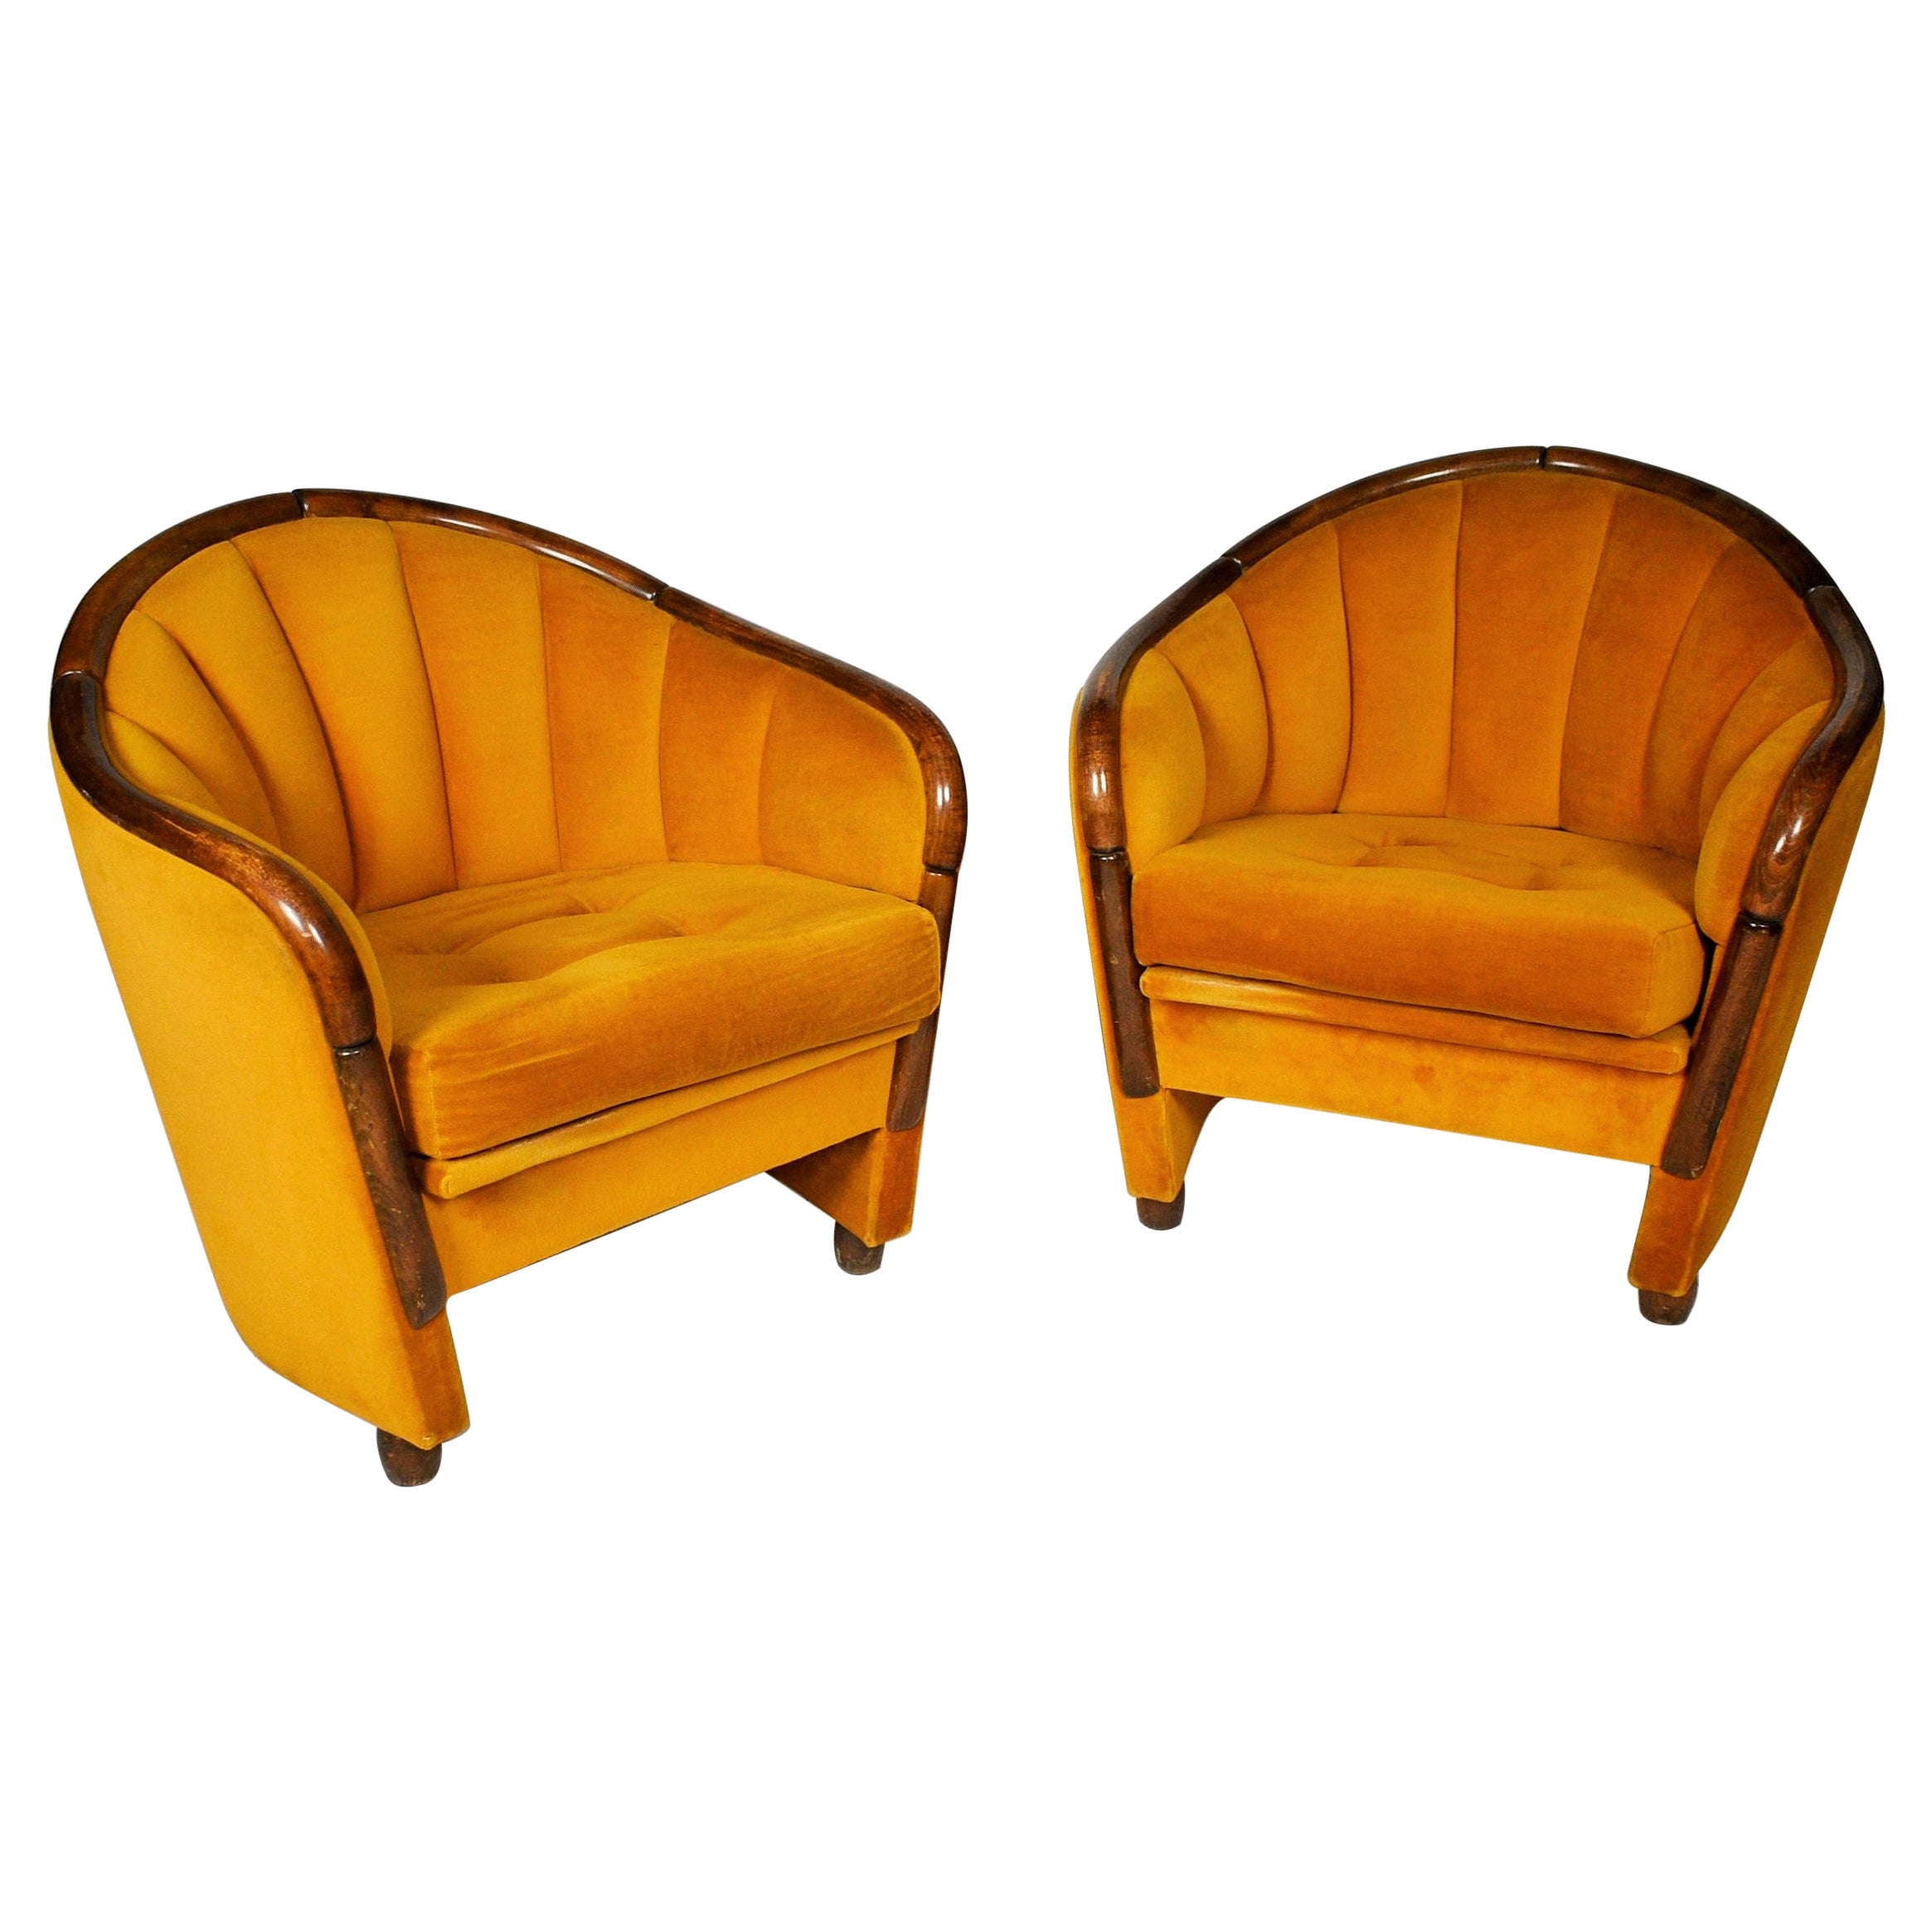 Italian Armchairs in the Style of Gio Ponti, 1950s